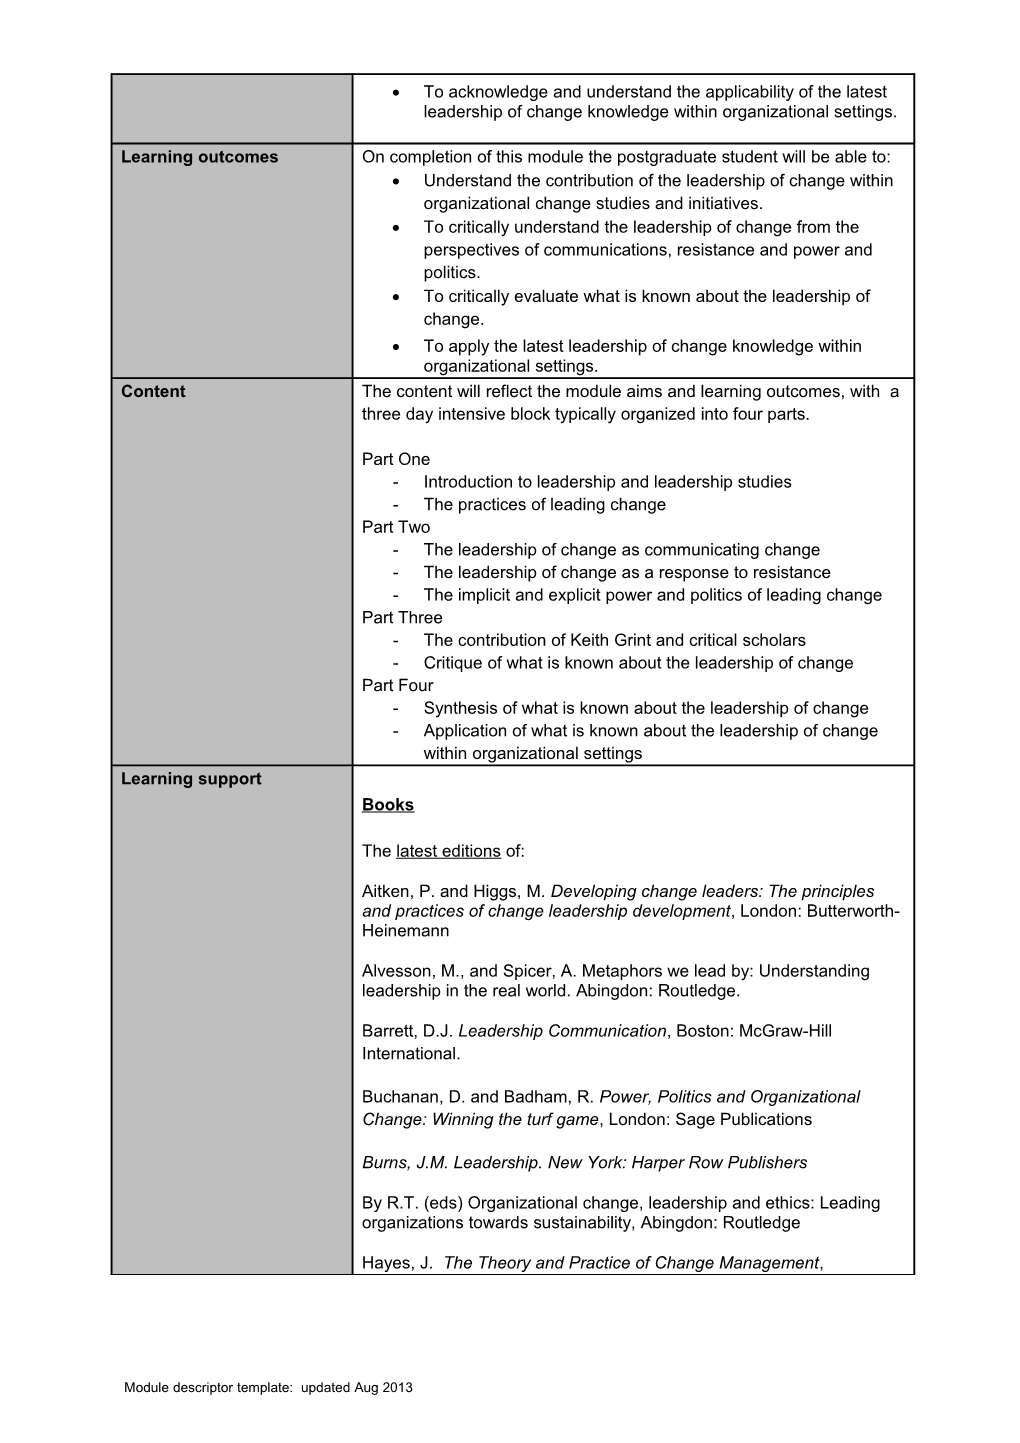 Module Specification Template s4